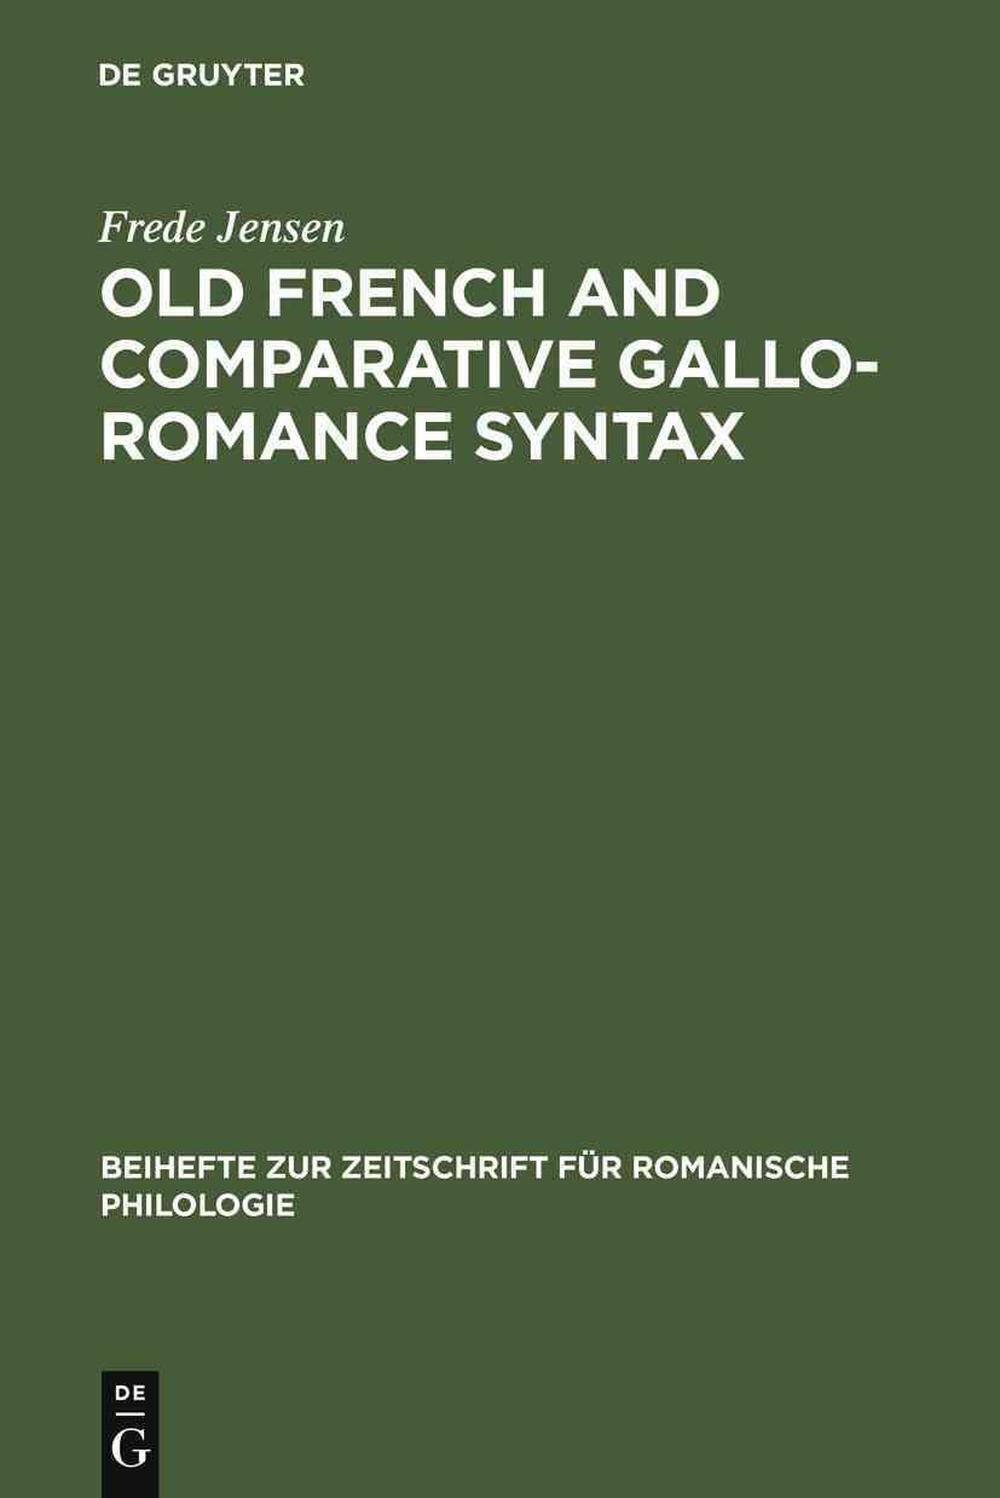 Old French and Comparative Gallo-Romance Syntax by Frede Jensen (English) Hardco